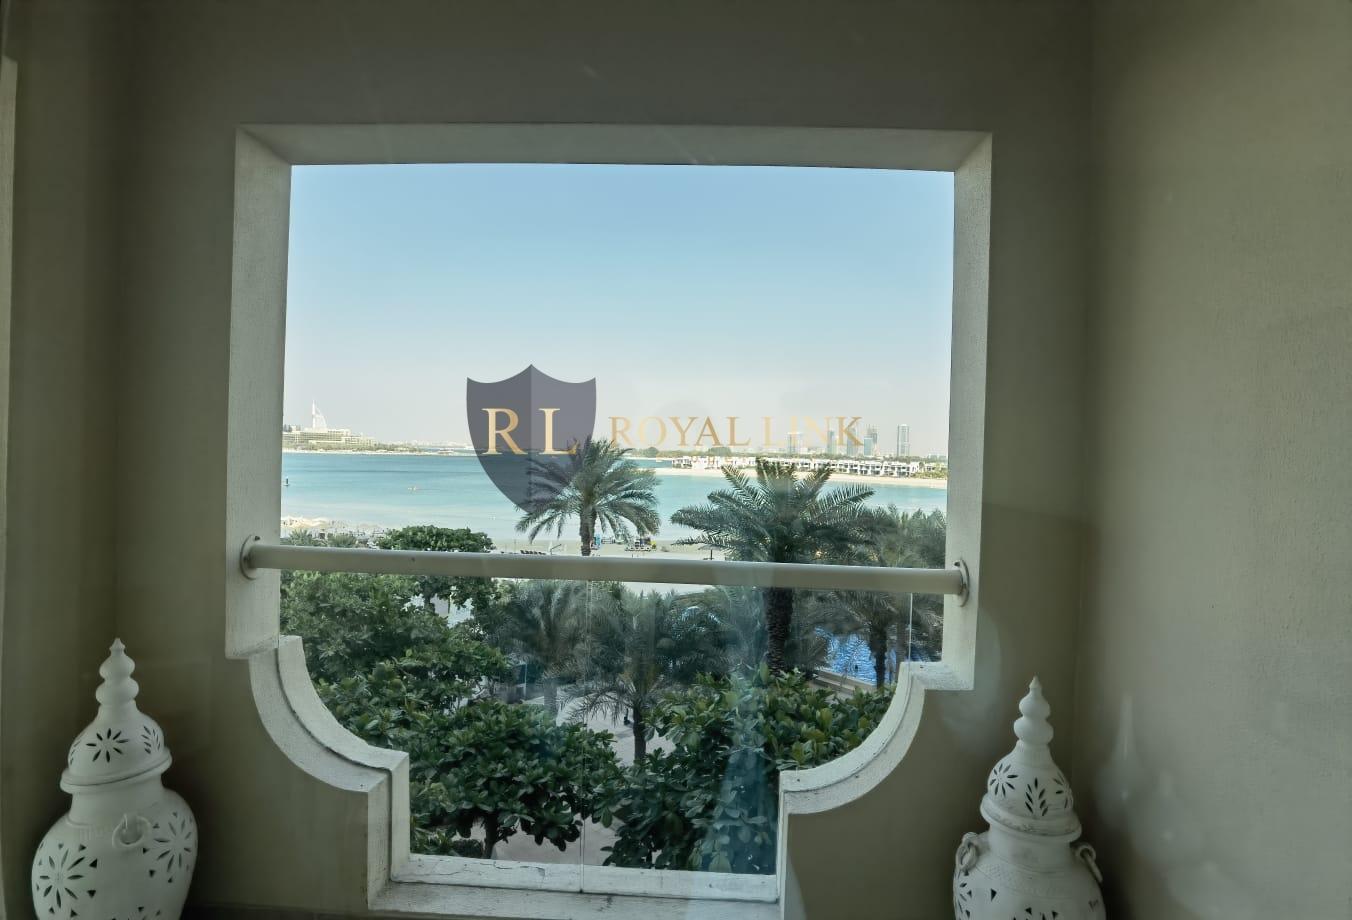 2 bed, 3 bath Apartment for rent in Al Das, Shoreline Apartments, Palm Jumeirah, Dubai for price AED 285000 yearly 